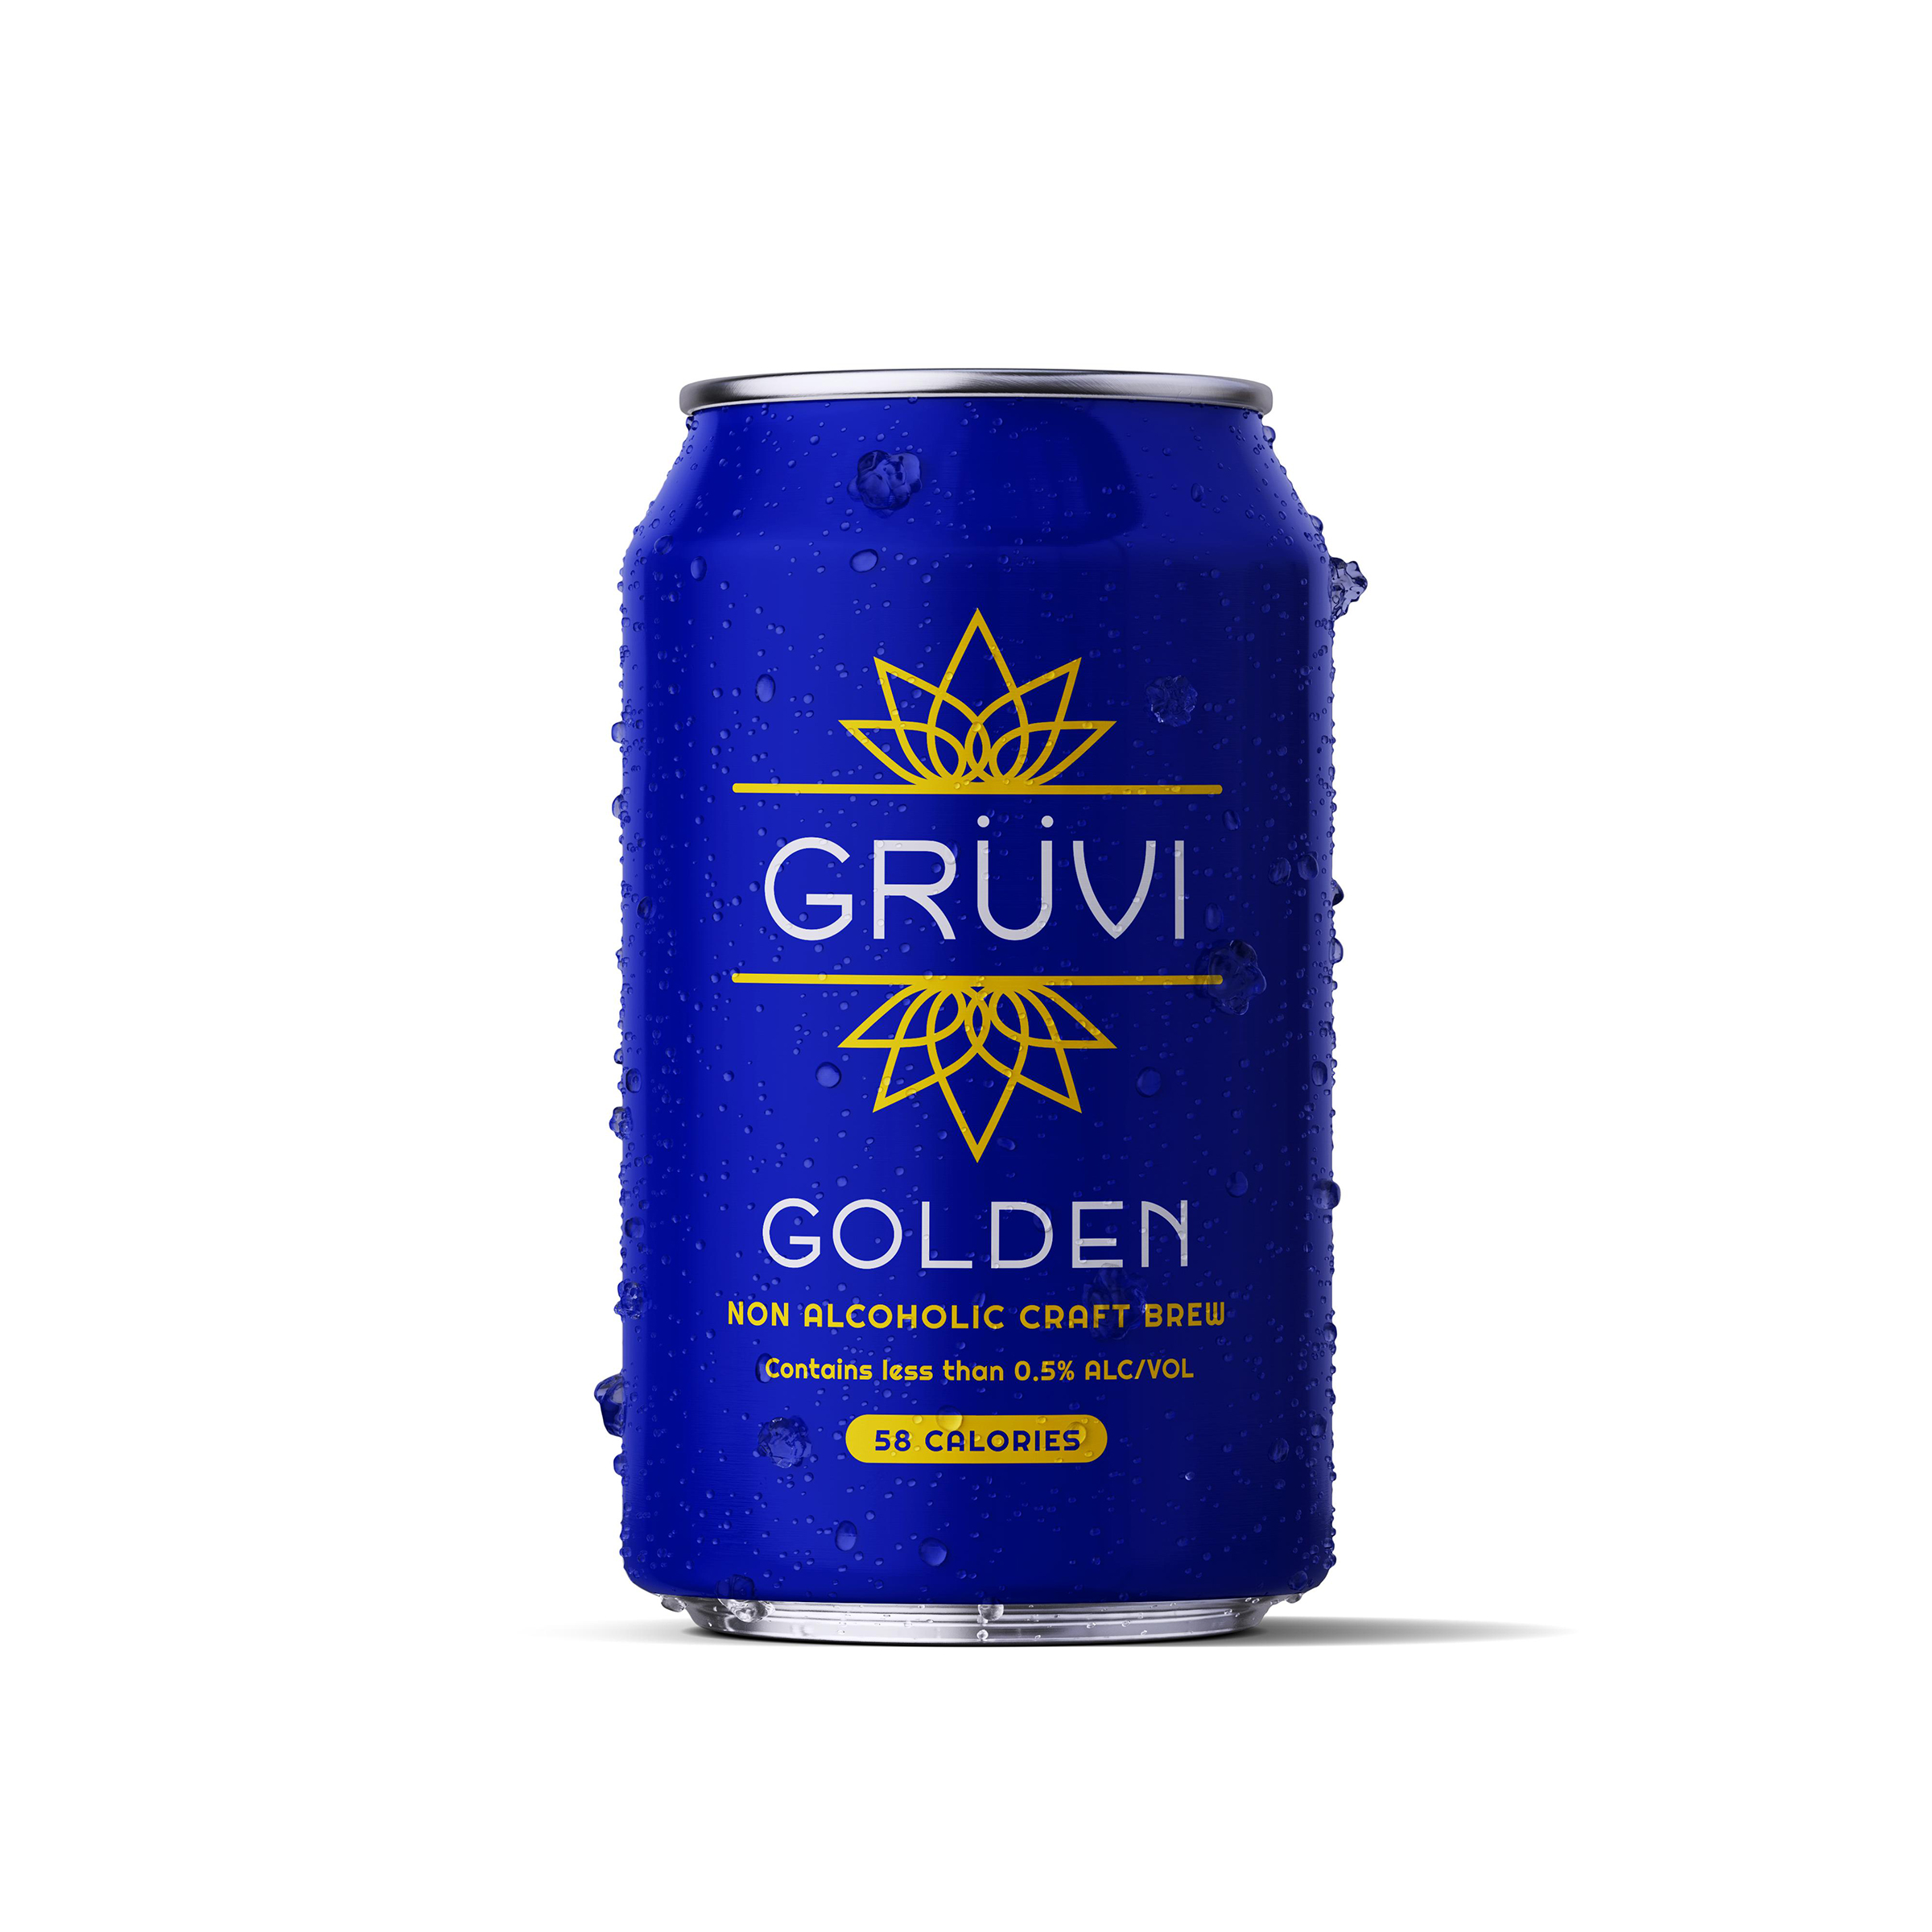 Grvi Gruvi Non-Alcoholic Golden Lager - Beer - 6x 12oz Cans